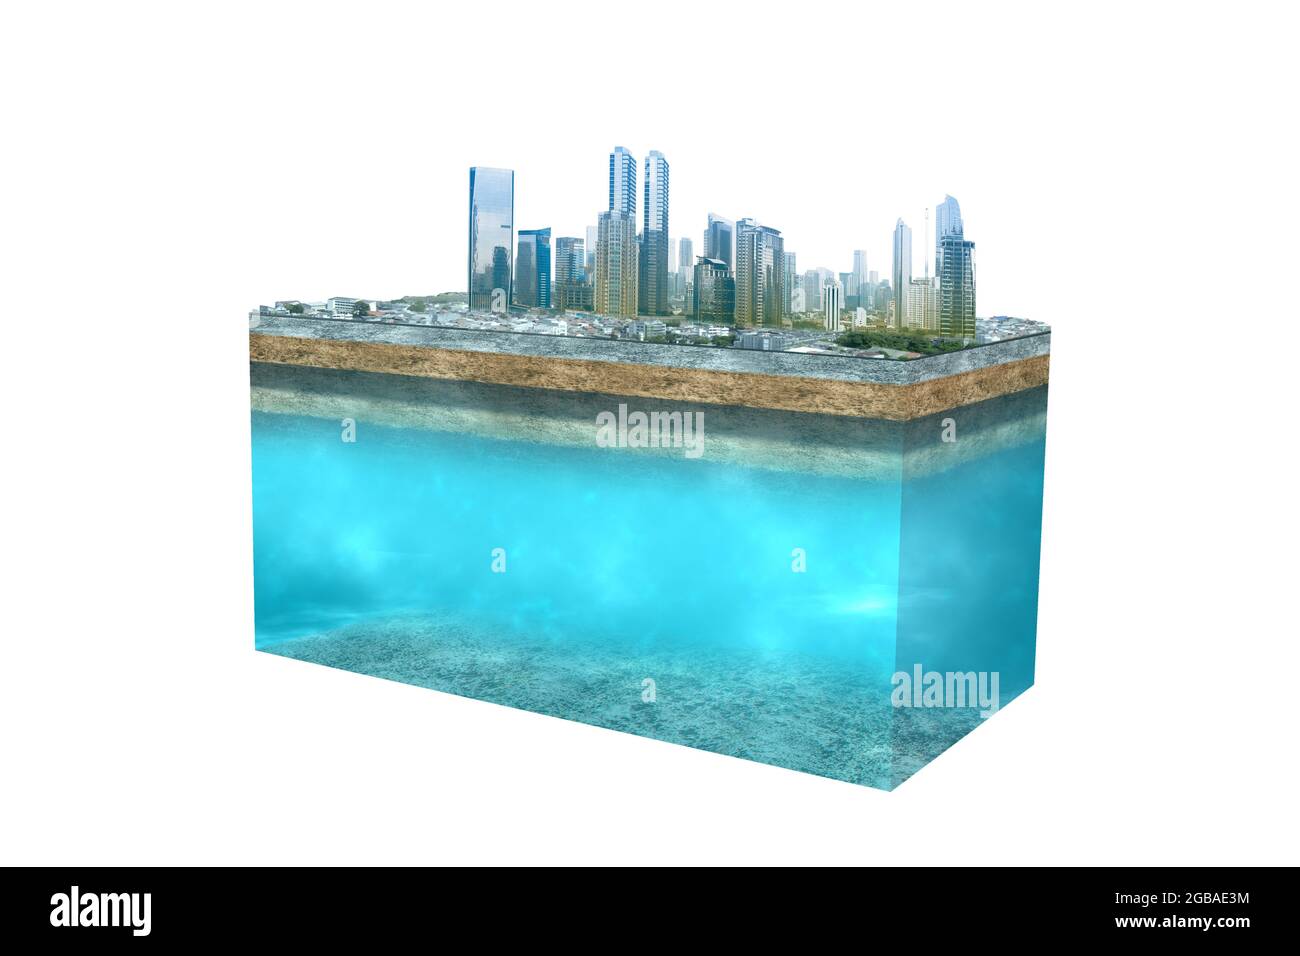 Skyscrapers and modern buildings standing above the subsoil. Environment concept Stock Photo